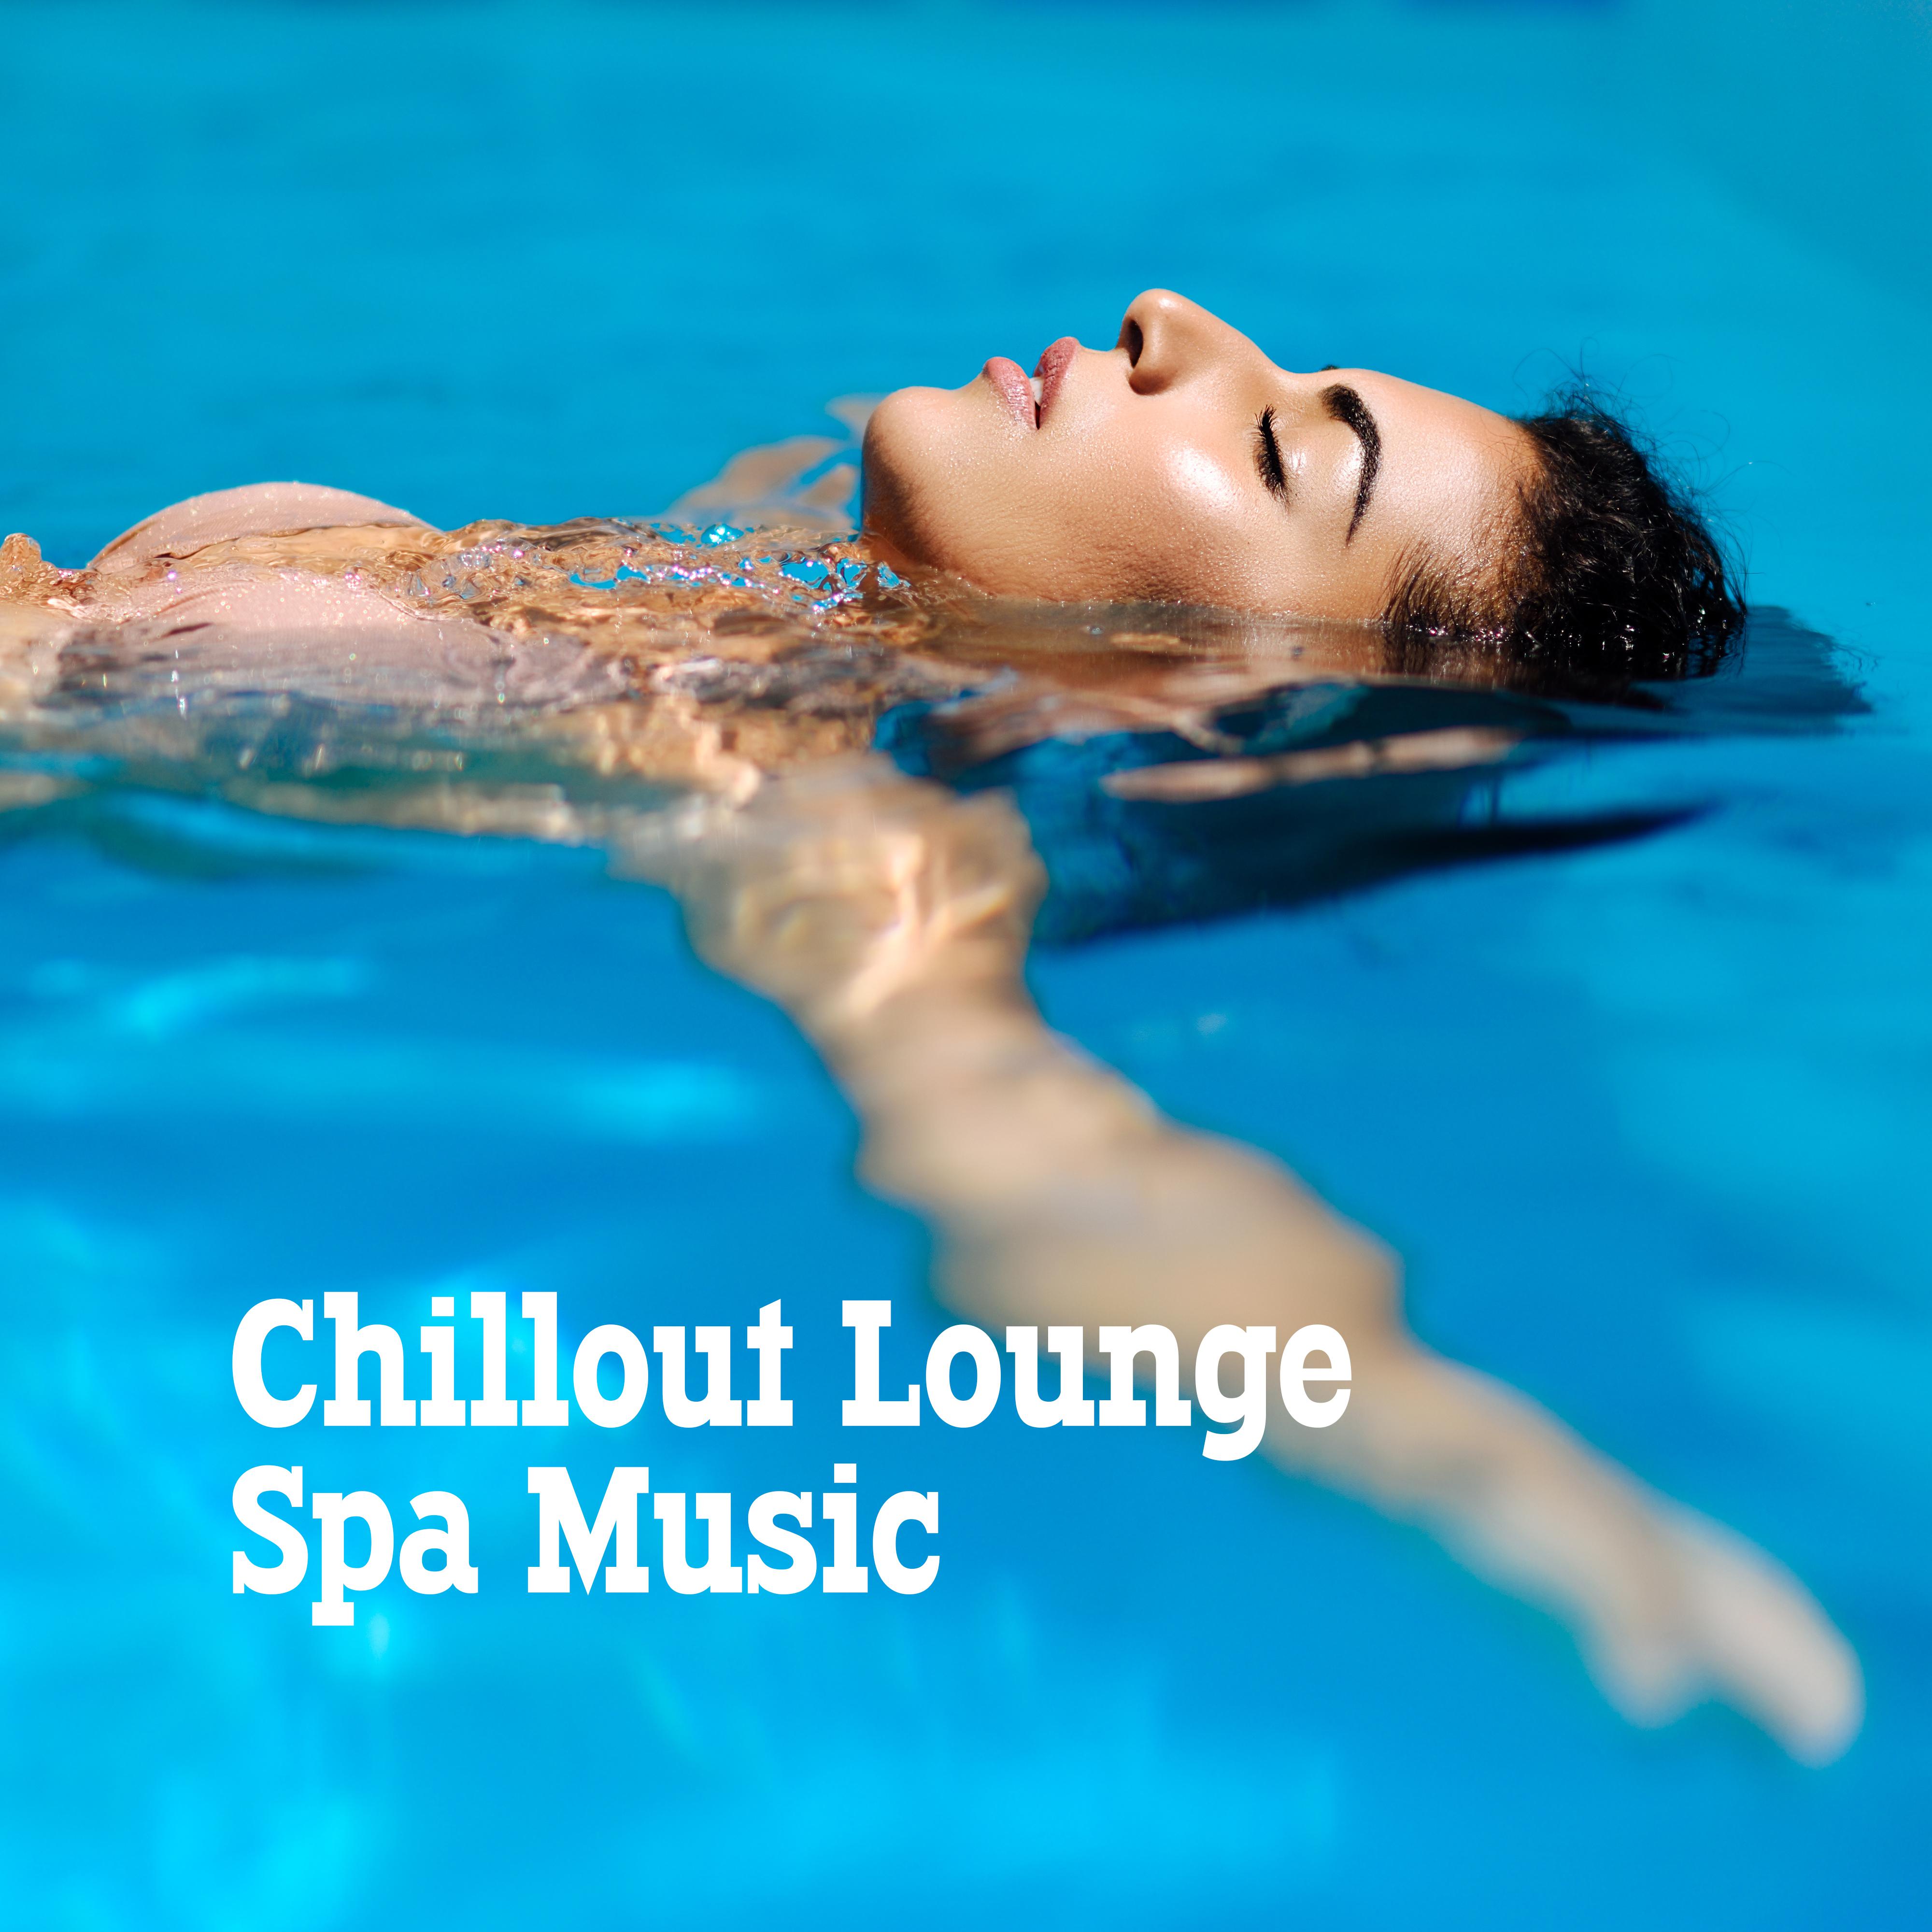 Chillout Lounge Spa Music: Extremely Relaxing Music for the Spa, Sauna, Wellness, Massage, Beauty and Rejuvenating Treatments